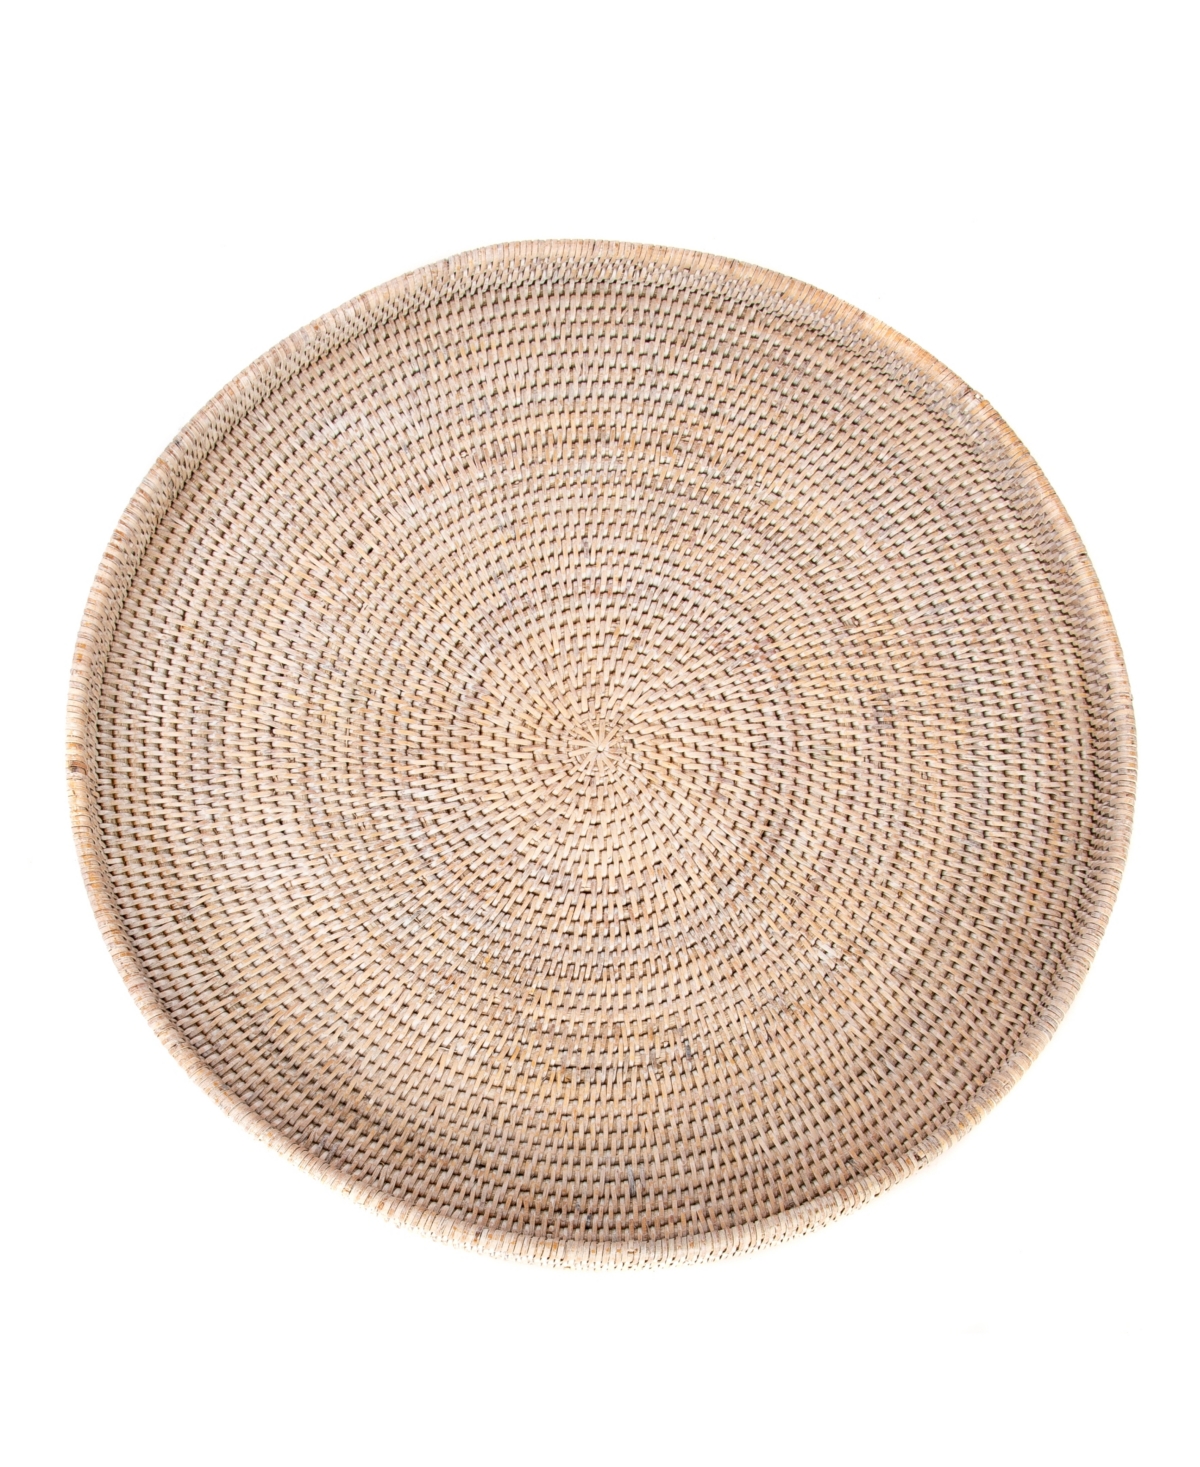 Artifacts Trading Company Artifacts Rattan Round Tray In Off-white